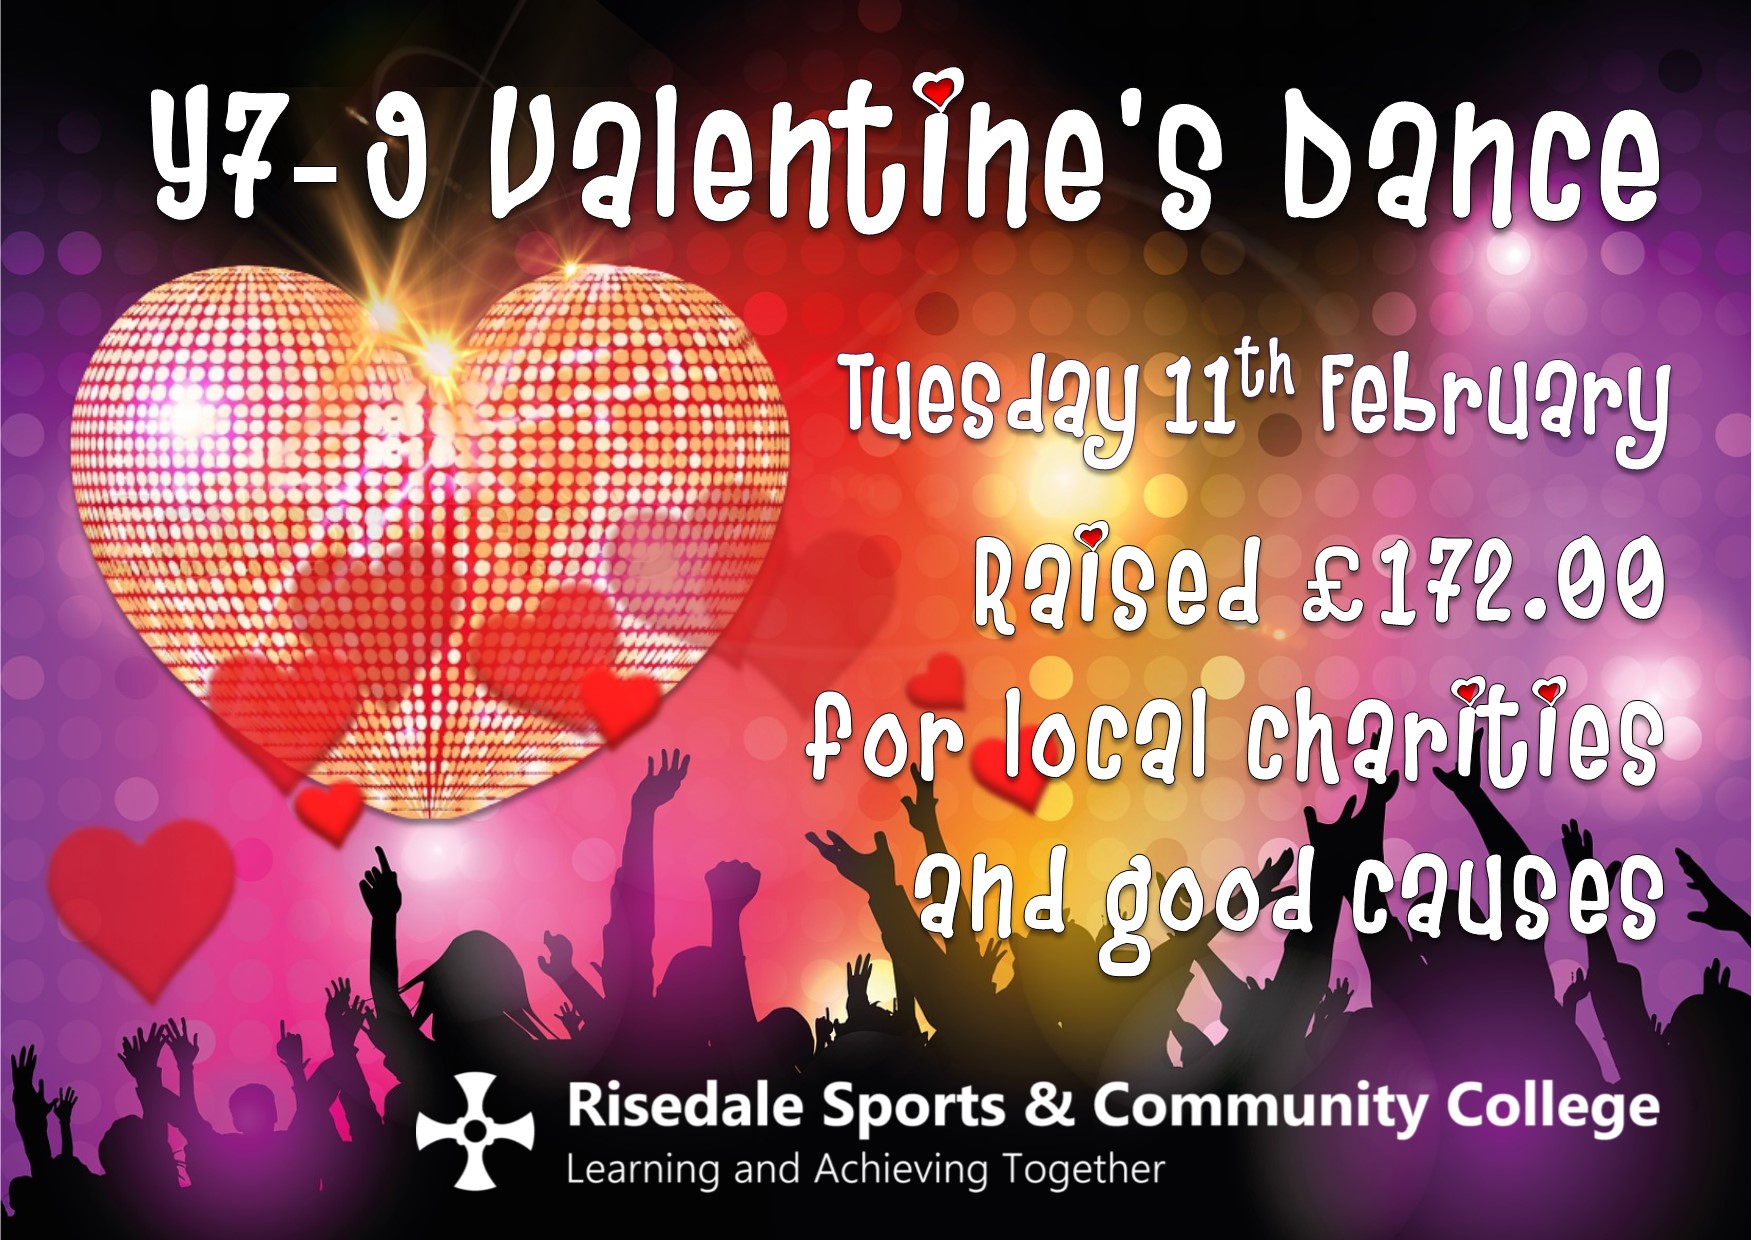 ​​​£172.00 raised for local charities and good causes - ​11th February 2020: